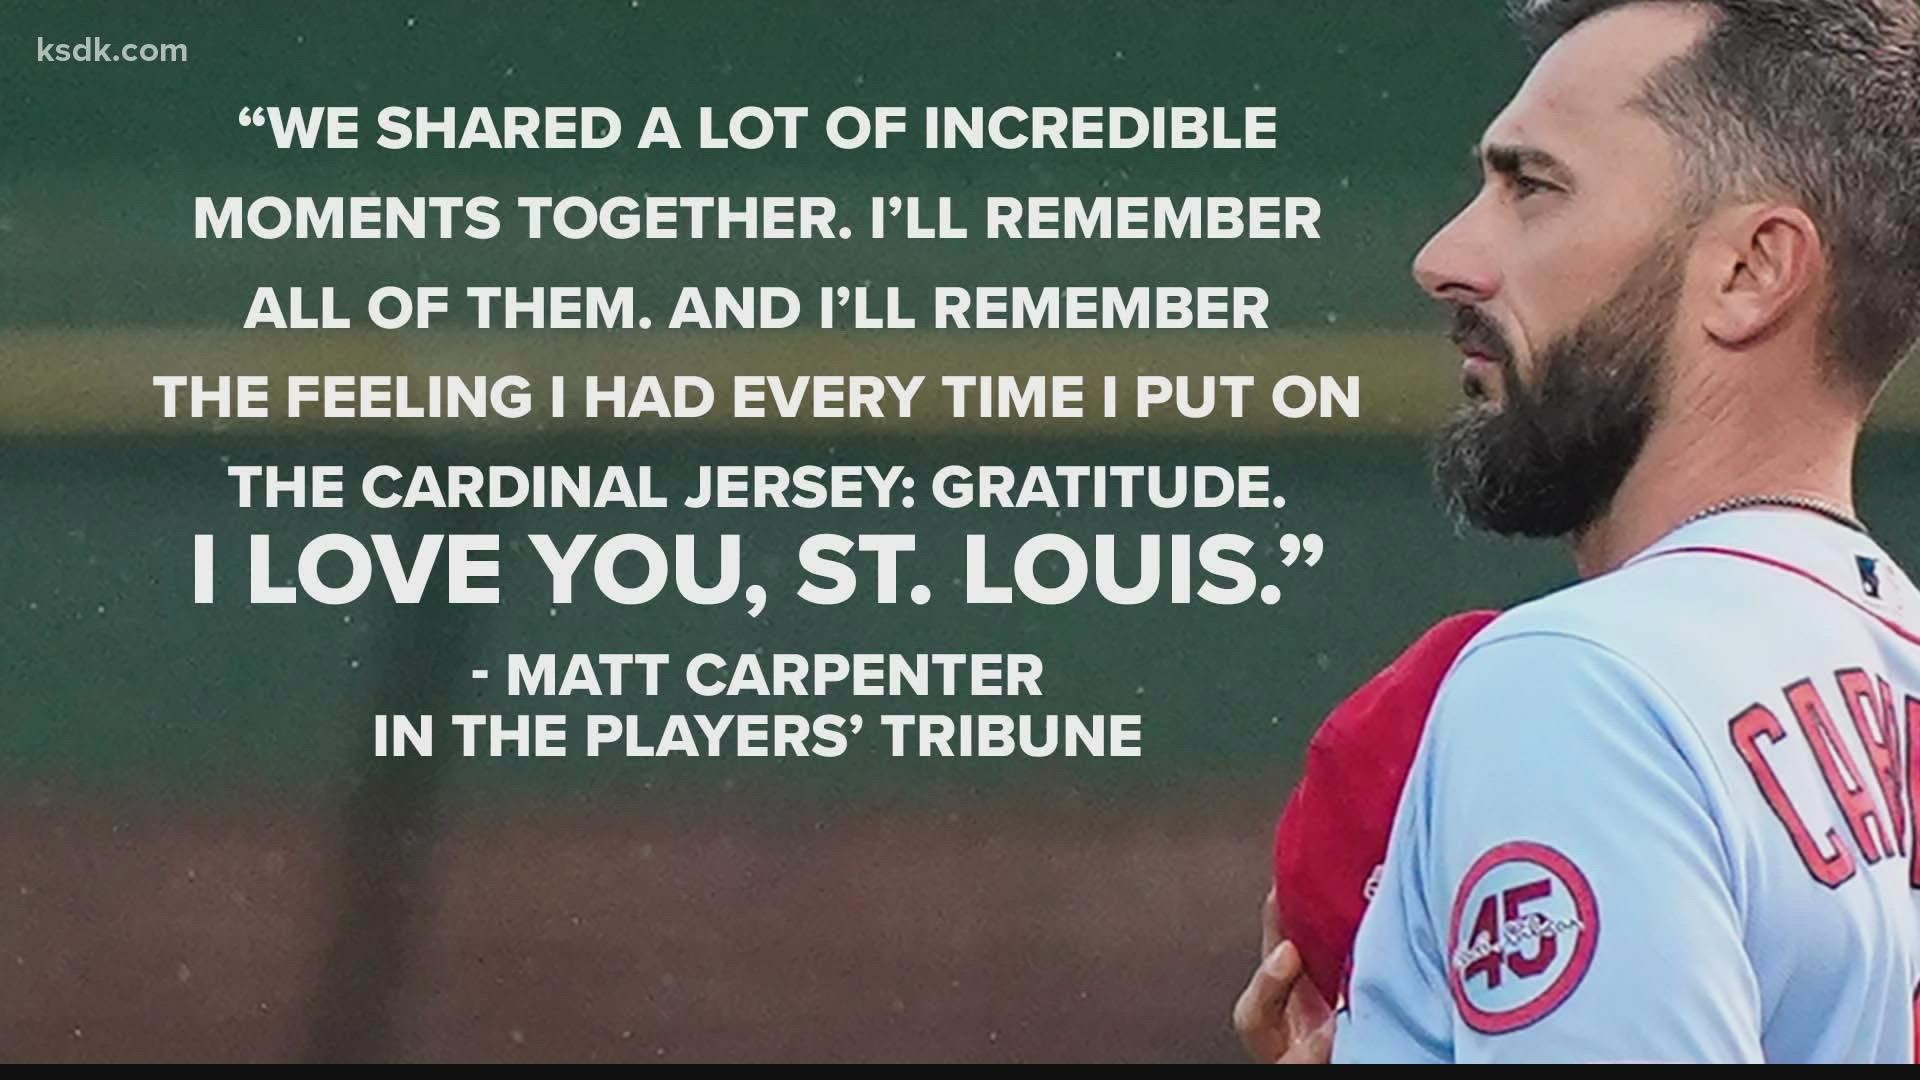 Carpenter wrote a piece for the Players' Tribune as his time with the Cardinals has ended. Carpenter is a free agent.